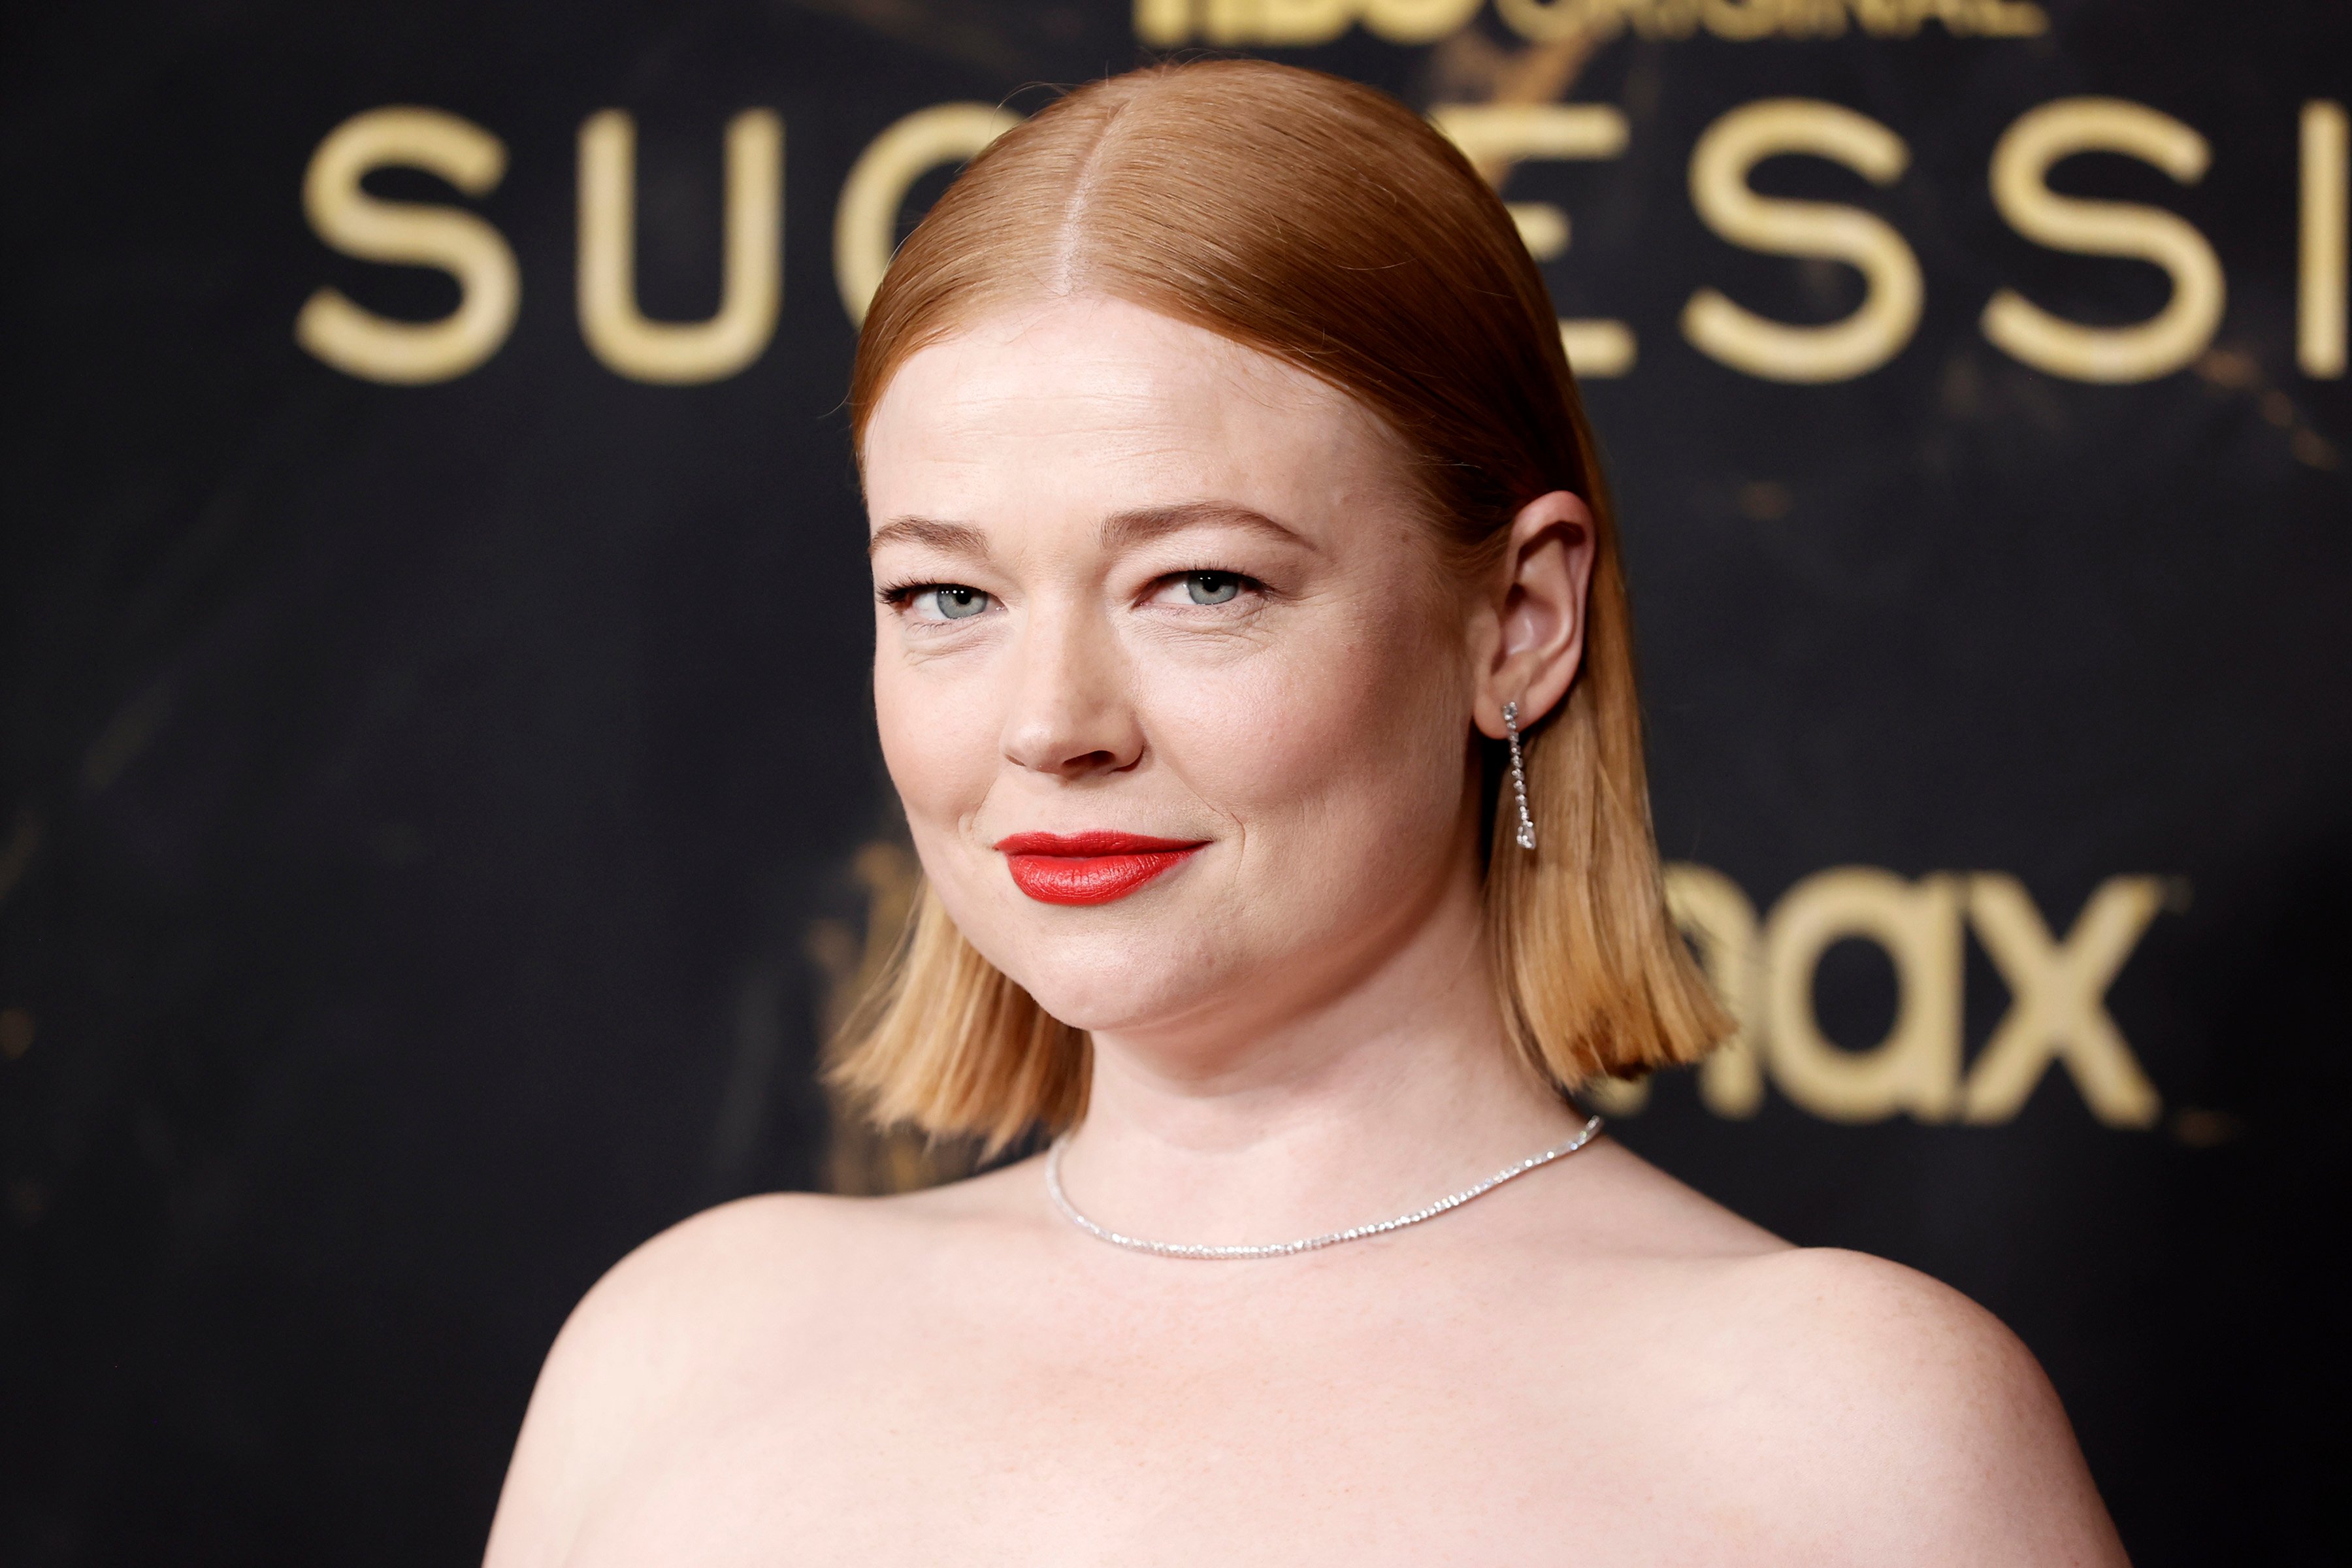 Succession cast member Sarah Snook wears a strapless dress and red lipstick.